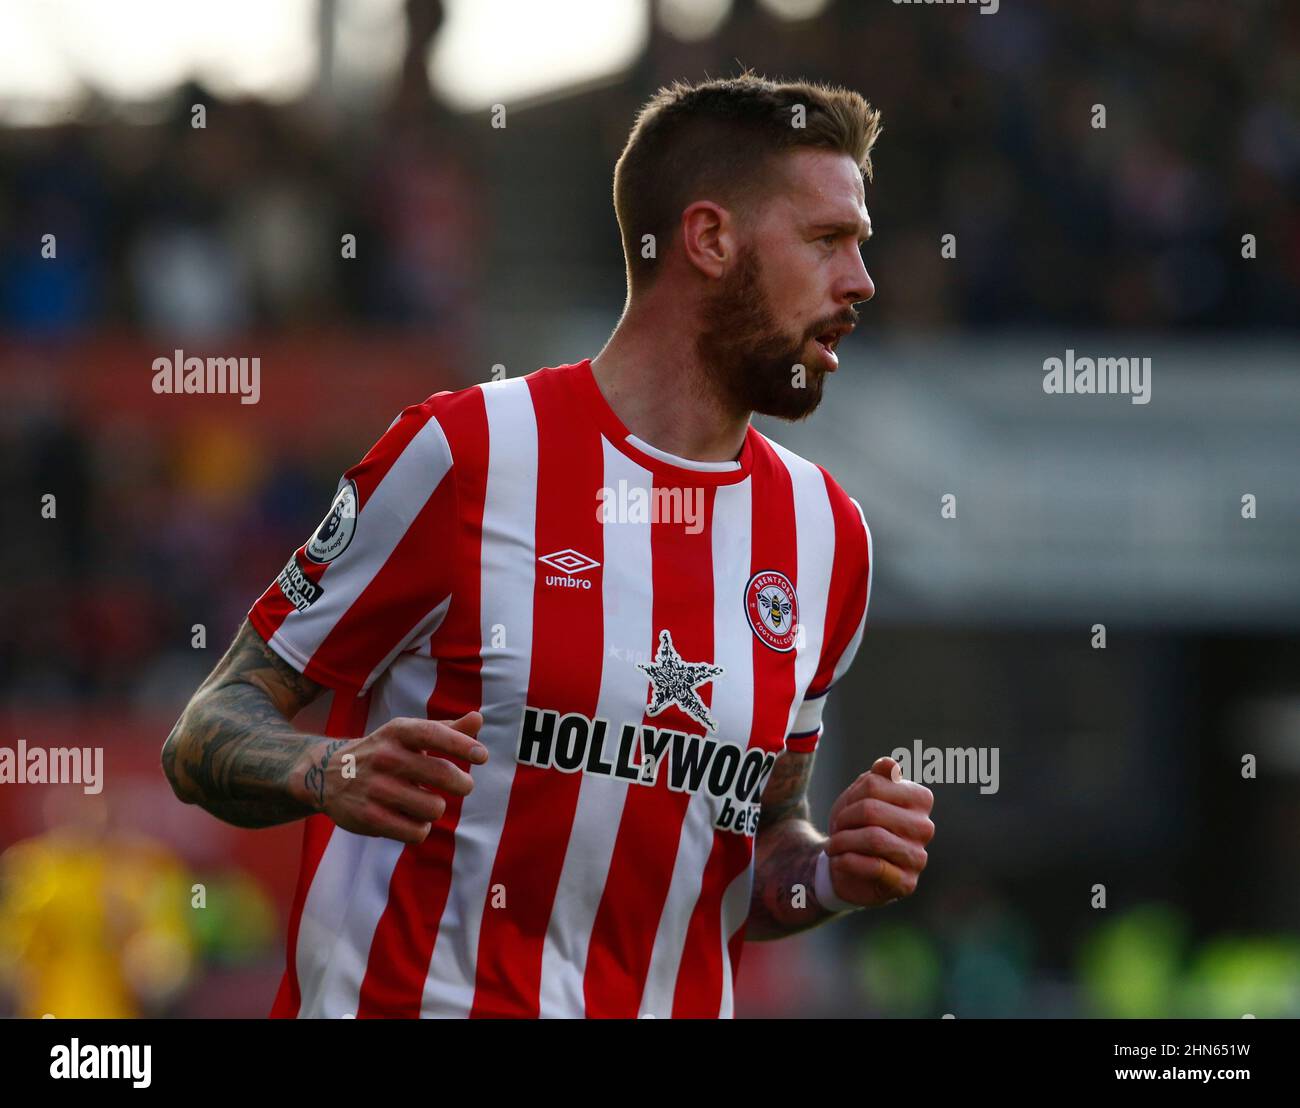 London, England - FEBRUARY 12: Pontus Jansson of Brentford  during  Premier League between Brentford and Crystal Palace at Brentford Community Stadium Stock Photo